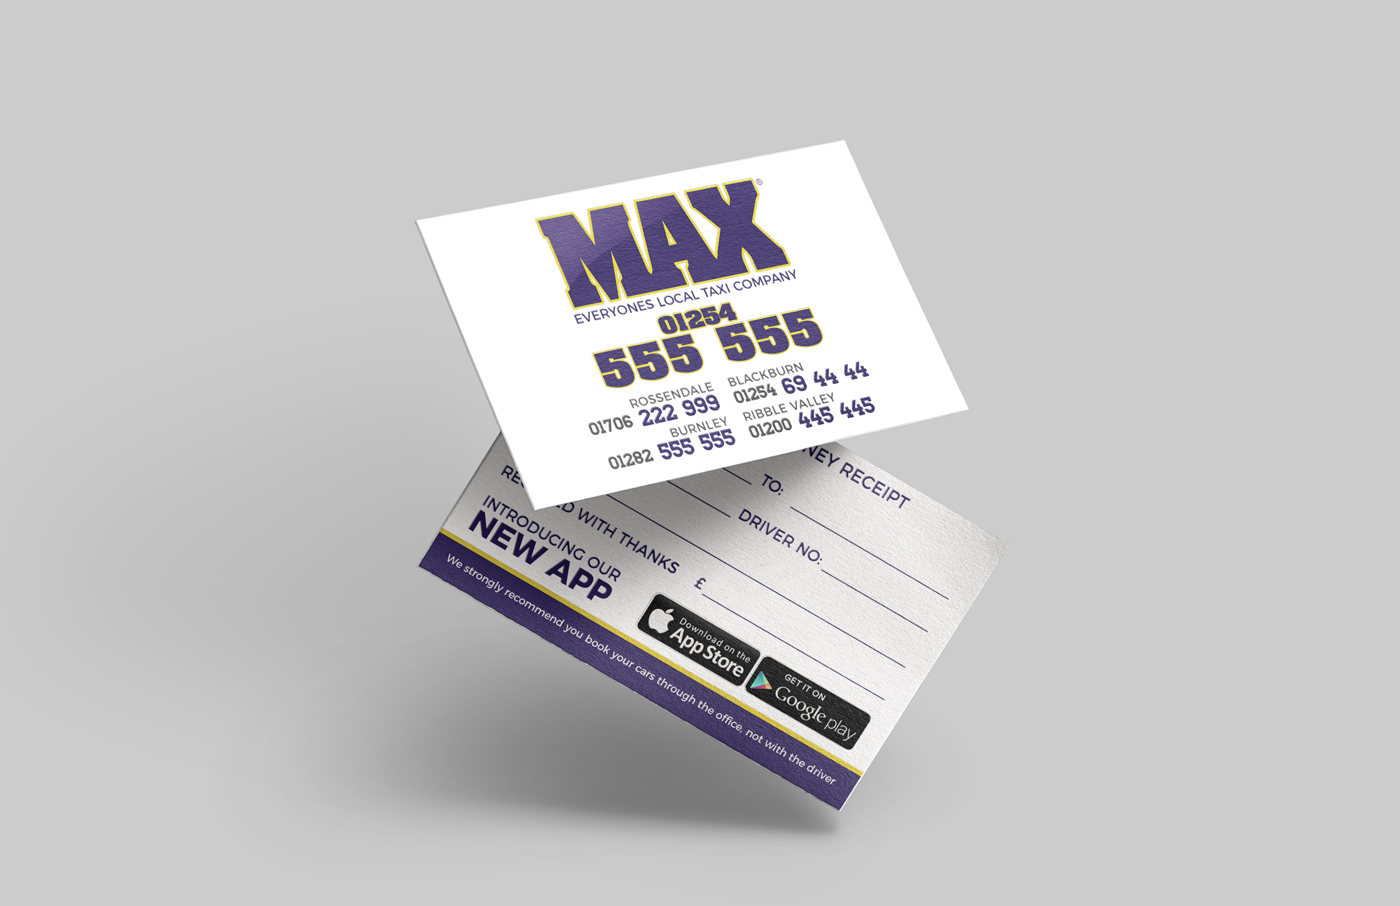 Taxi_Business Cards